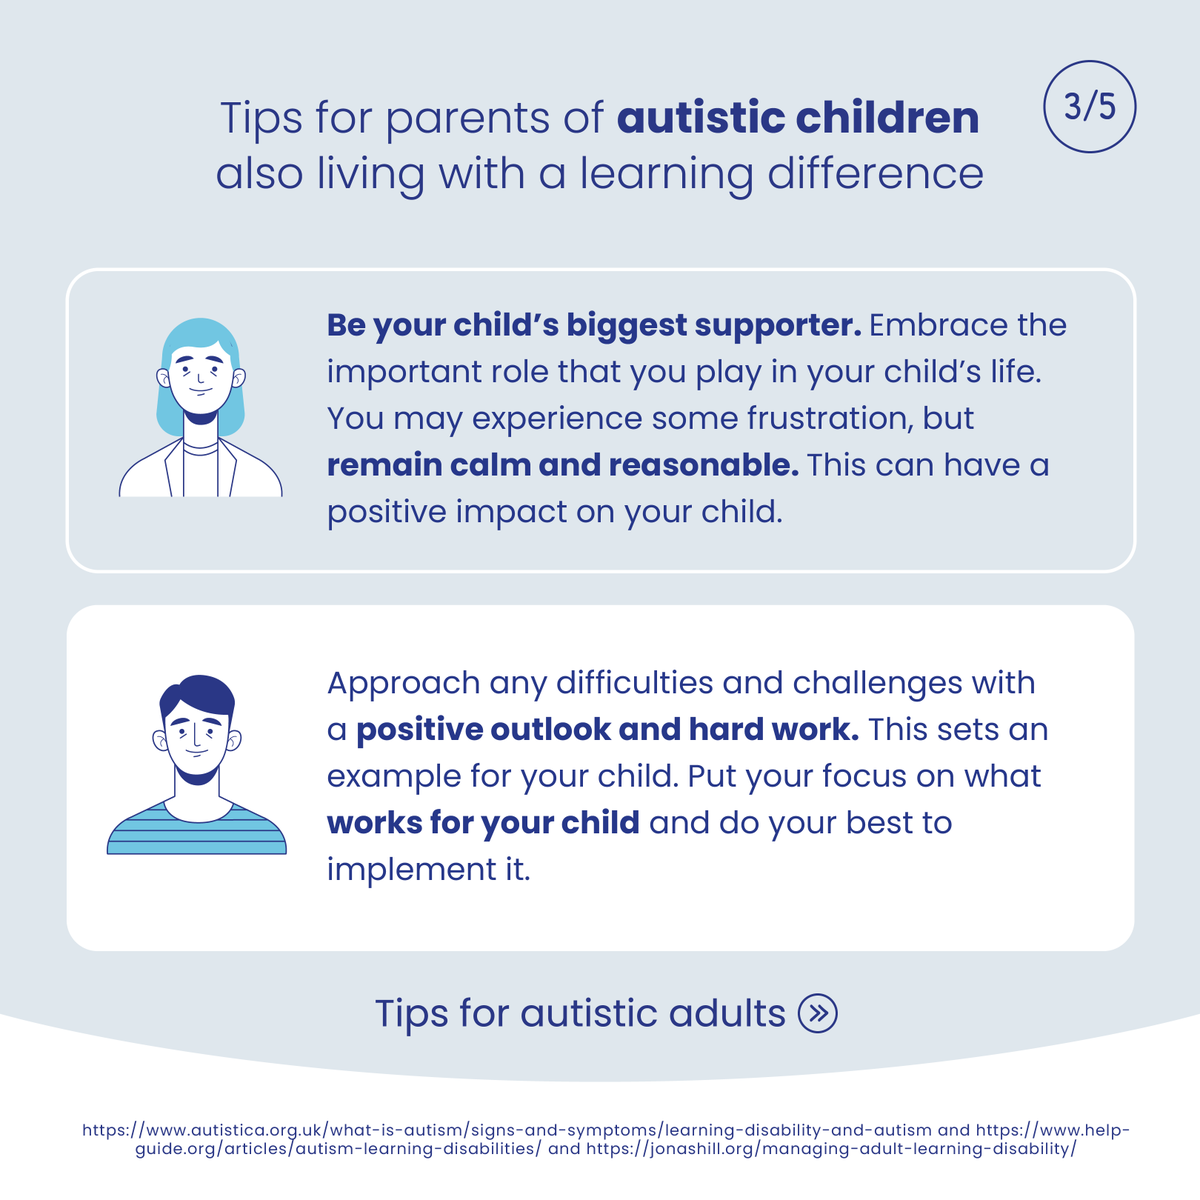 #learningdifferences and #autism: The stats, tips for parents and adults. 🤗

#learningdisability  #learningdisabilities #learningdifference #learningdisabilityawareness #learningdisorder #learningdisabilitysupport #learningdisabilityuk #autismawareness #psychiatryuk